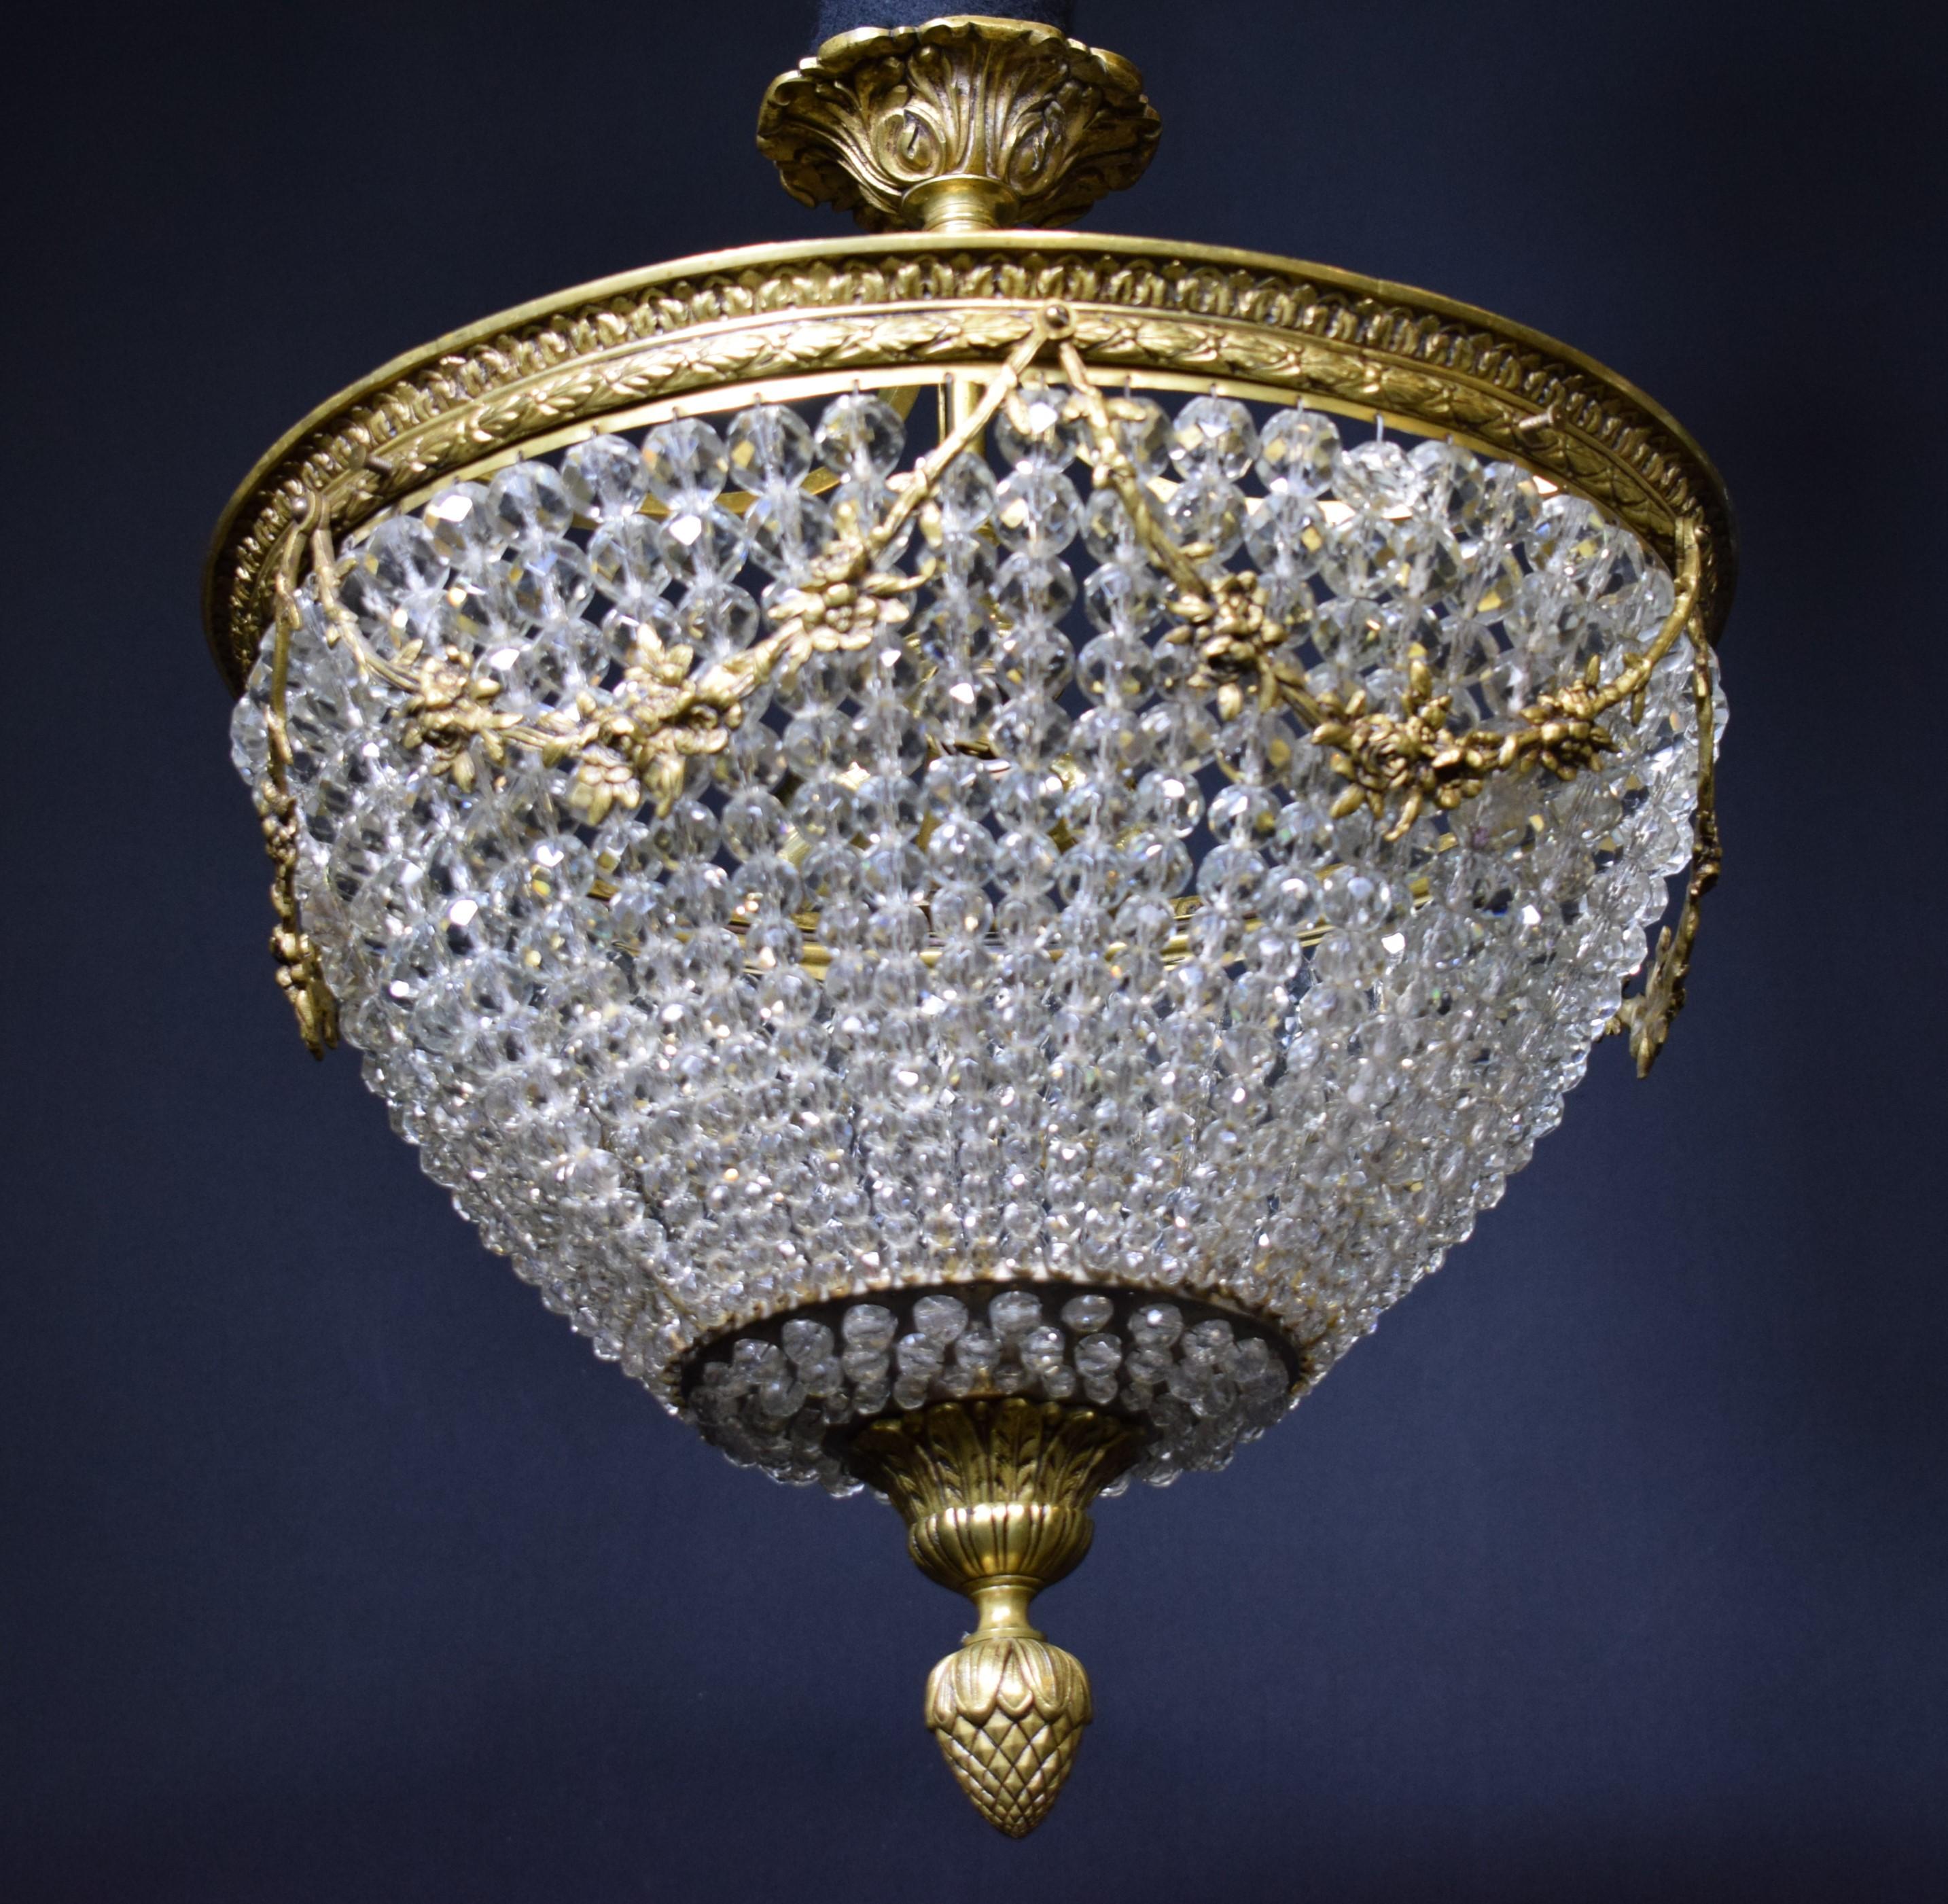 Very fine and elegant chandelier, gilt bronze frame with graduated strands of faceted beads. France, circa 1920. 3 lights. 
Dimensions: Height 19